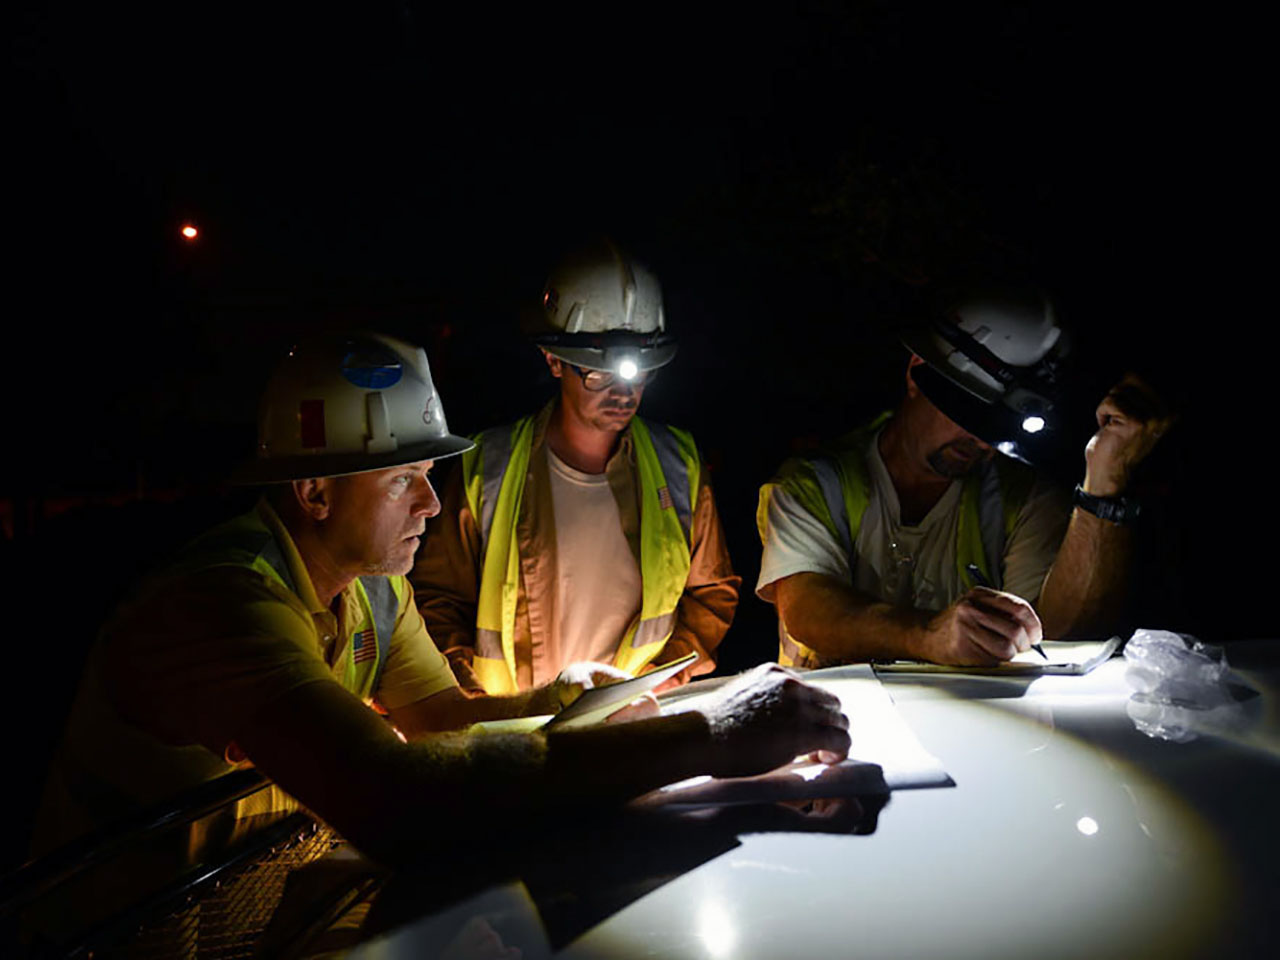 An Oncor restoration team meets at the scene of an outage following a storm to restore power safely and quickly.